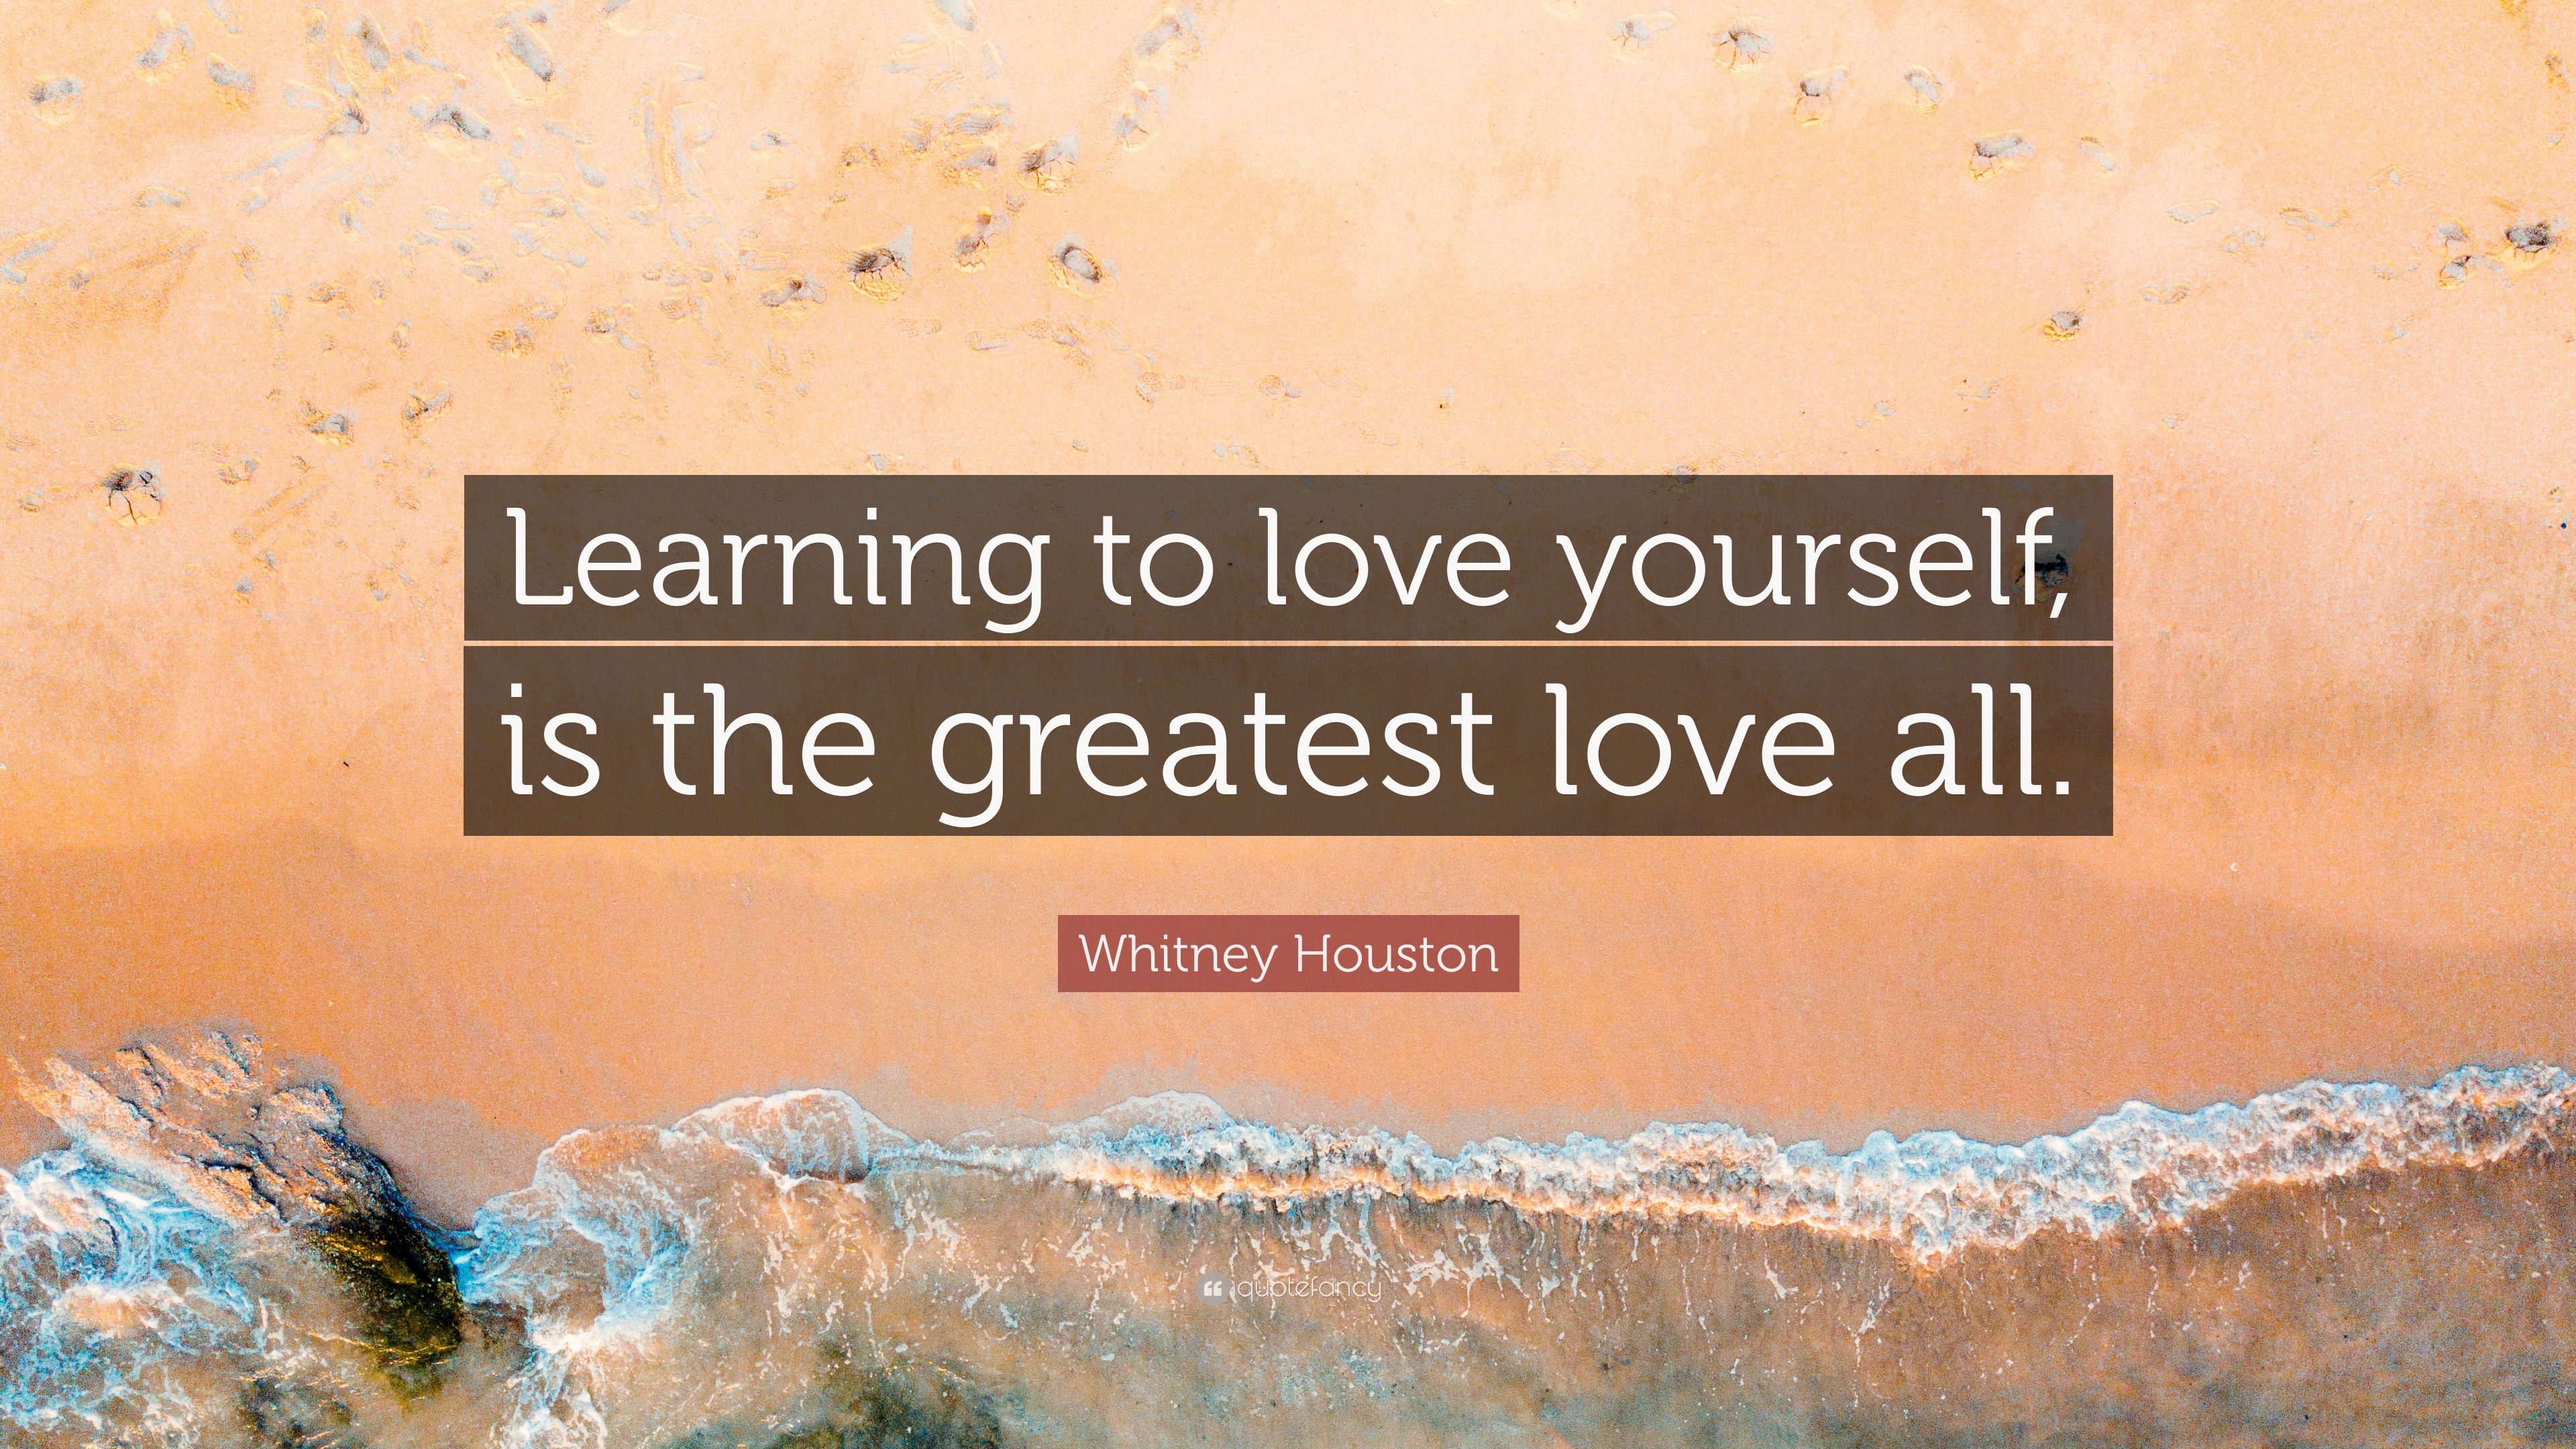 Quotes about learning how to love yourself